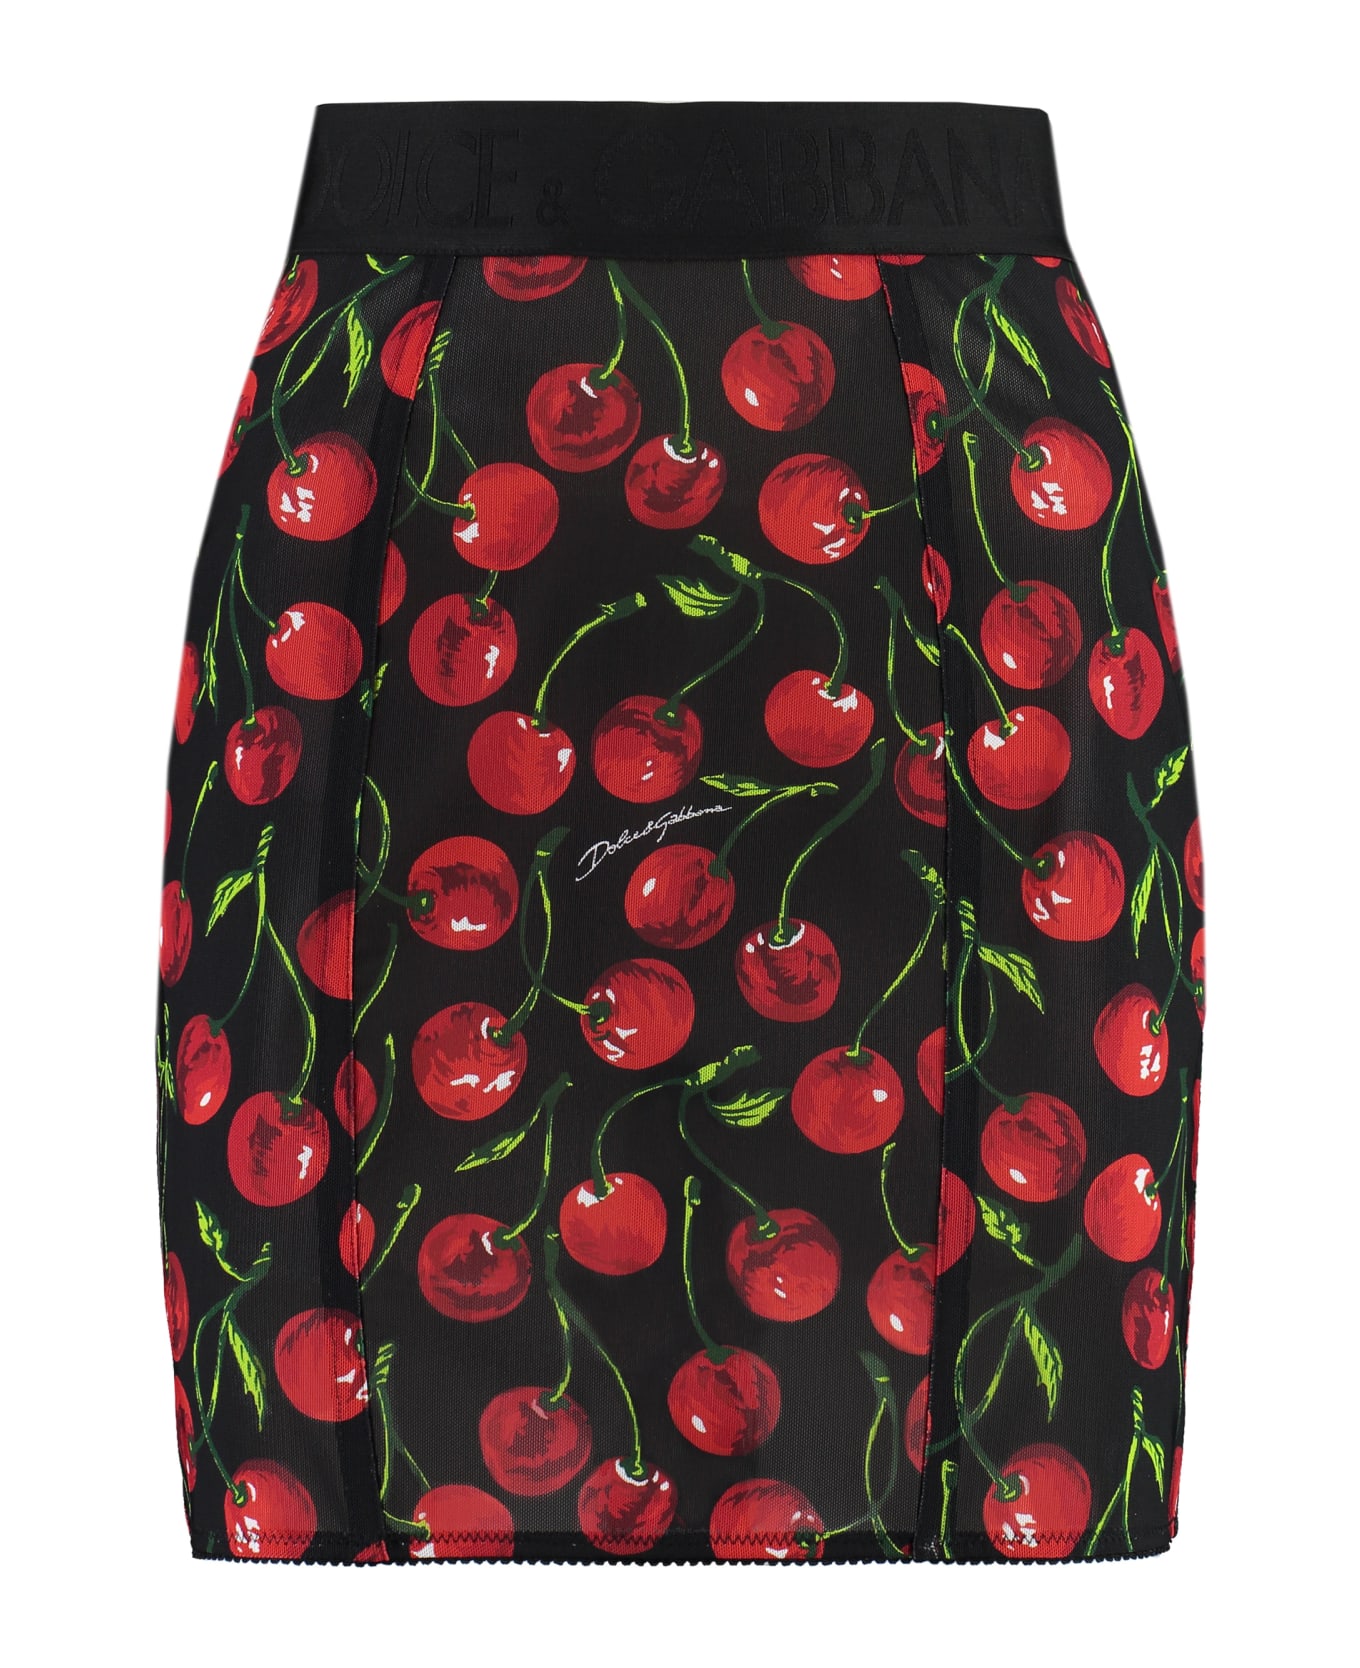 Dolce & Gabbana Mini-skirt With All-over Cherry Print - Multicolor スカート